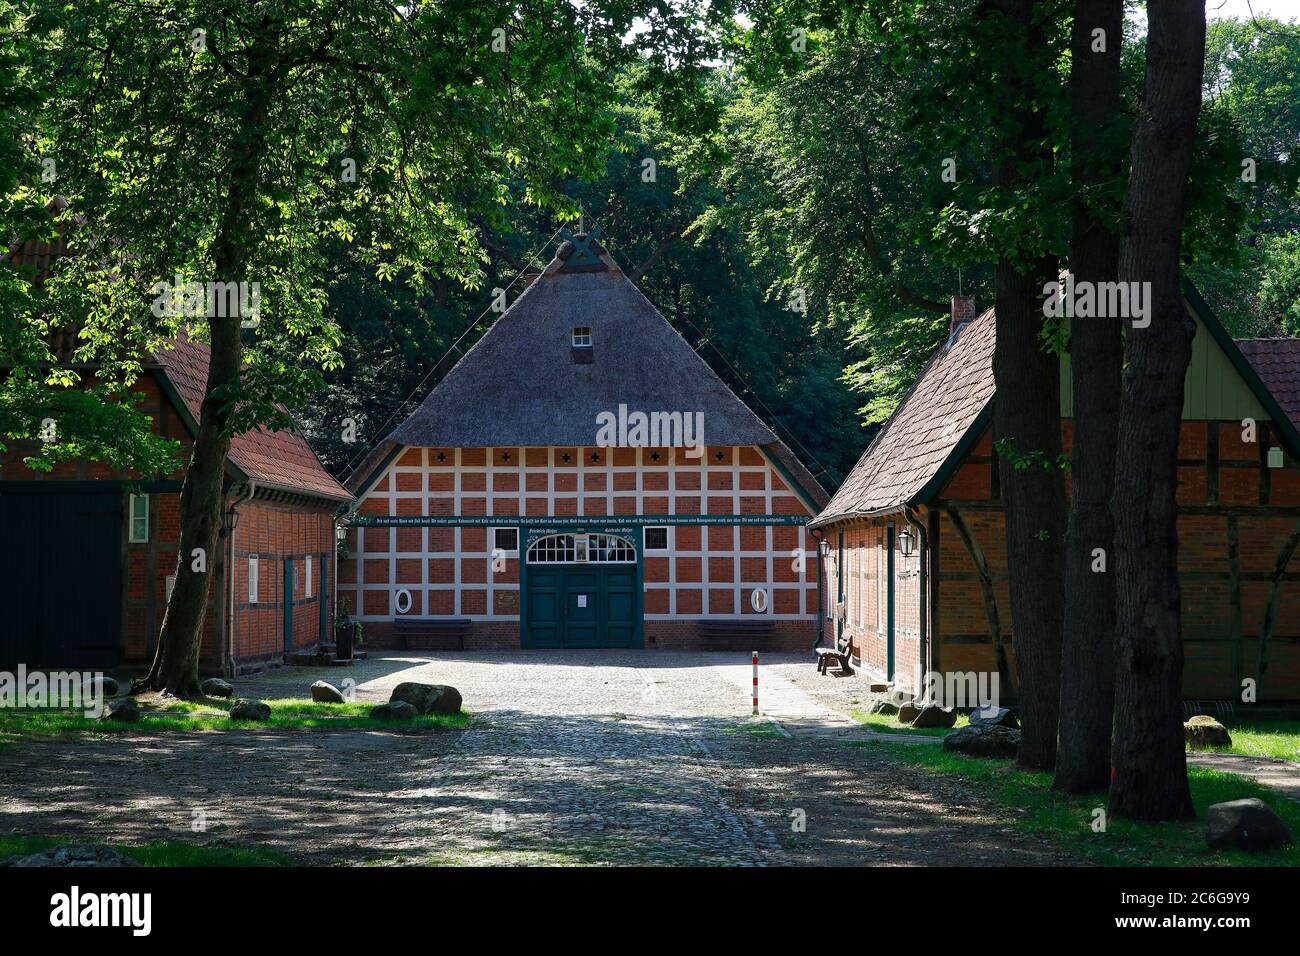 Scheessel Museum of Local History, Historic Meyerhof from 1875, cultural and meeting place, Scheessel, Nordheide, Lower Saxony, Germany Stock Photo